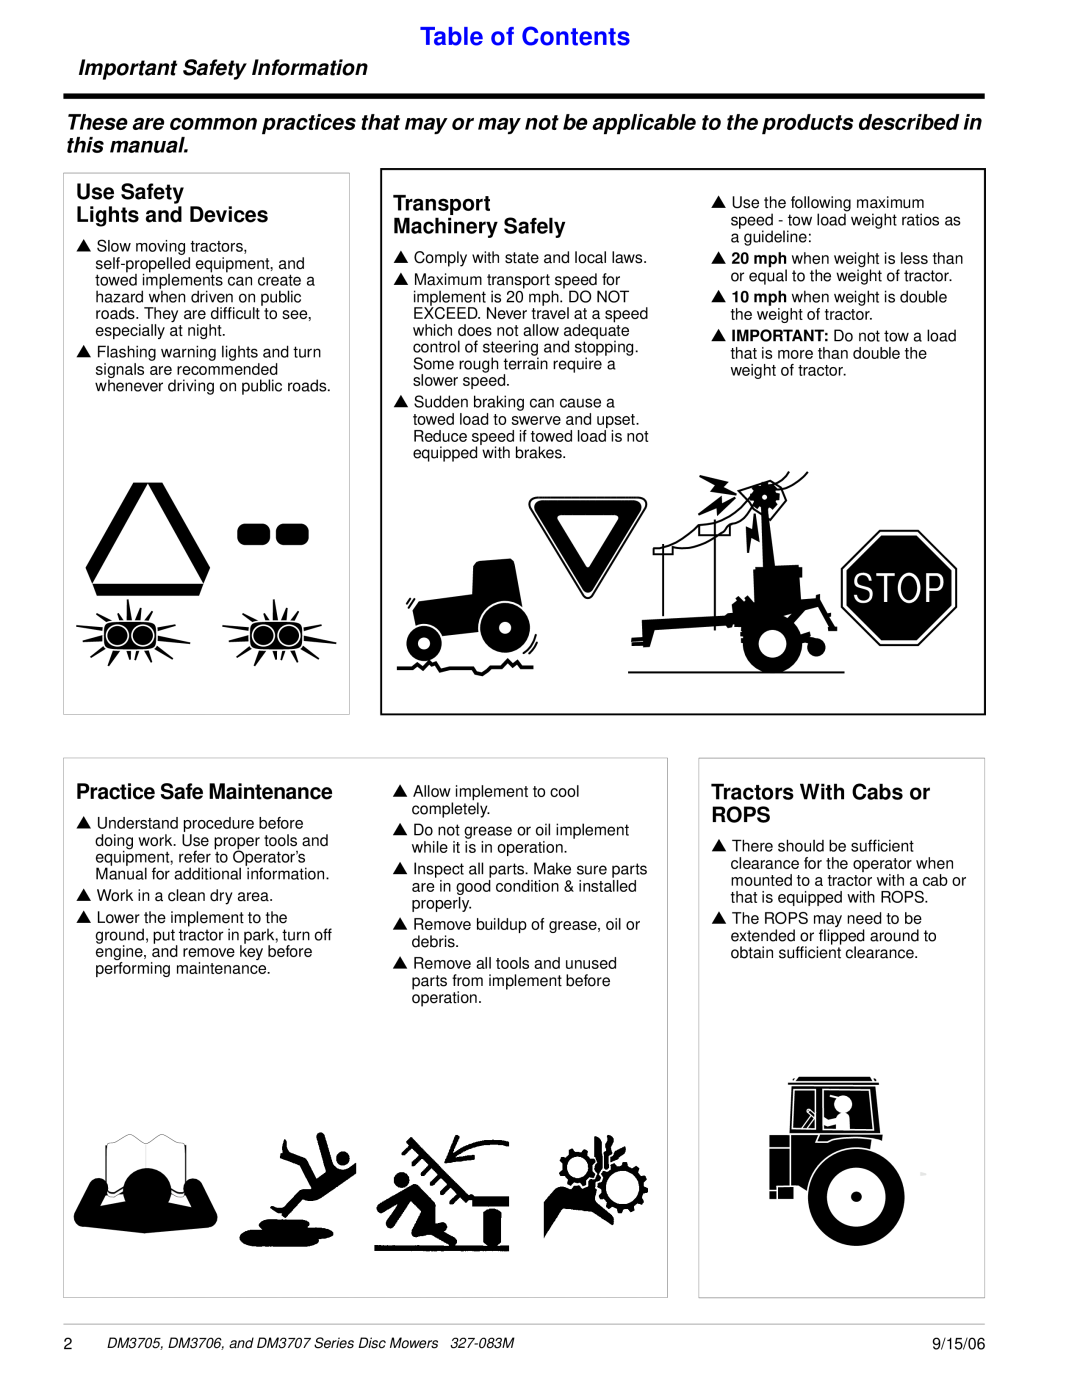 Land Pride DM3706 Series manual Table of Contents, Important Safety Information, Use Safety Lights and Devices, 9/15/06 